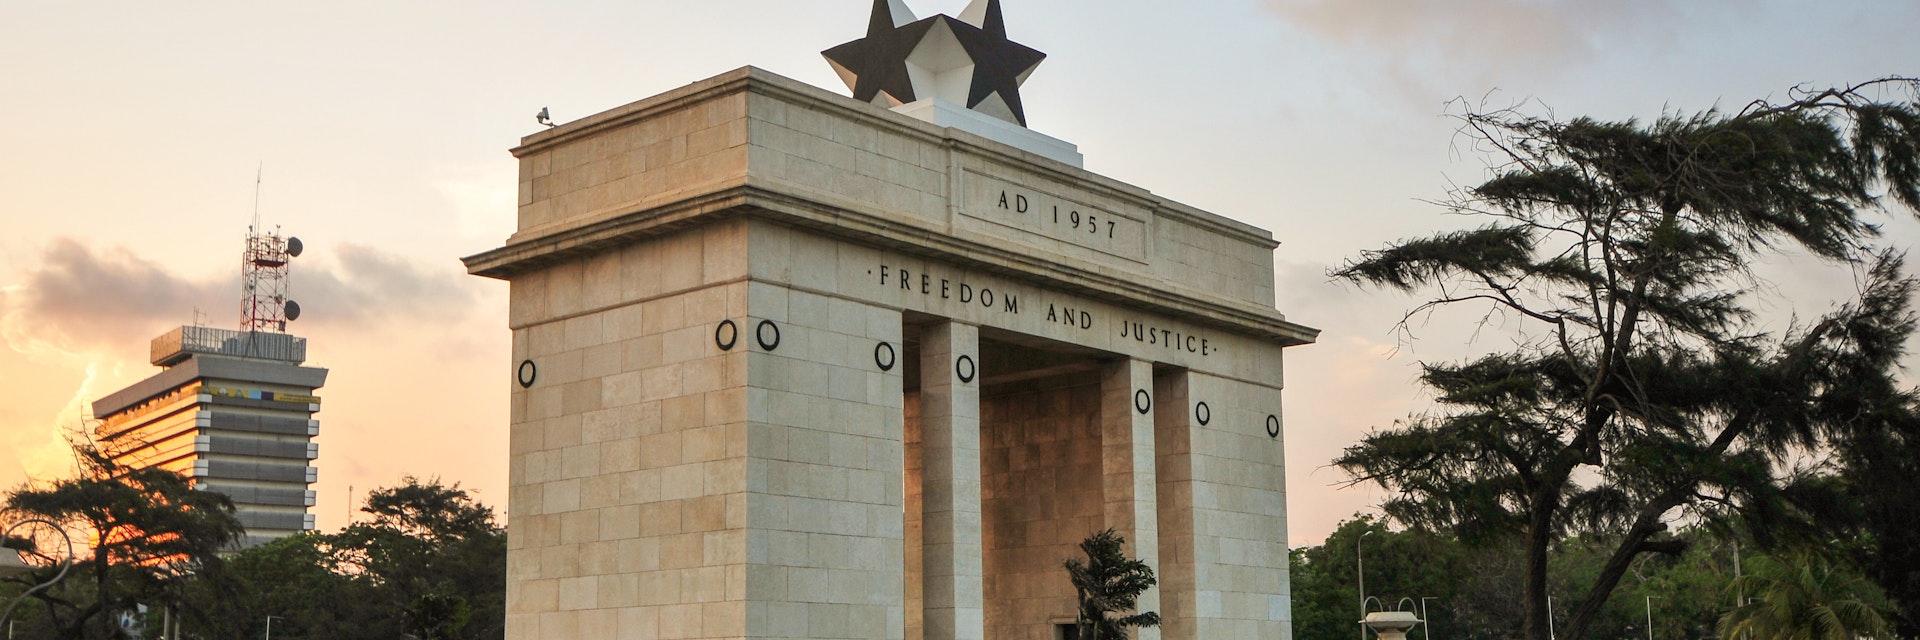 The Independence Square of Accra, Ghana, inscribed with the words "Freedom and Justice, AD 1957", commemorates the independence of Ghana, a first for Sub Saharan Africa. It contains monuments to Ghana's independence struggle, including the Independence Arch, Black Star Square, and the Liberation Day Monument.
453437701
1957, Accra, Africa, African Descent, Arch, Architecture, Black, Black Star, British Colony, Day, Dusk, East, Famous Place, Flag, Freedom, Ghana, Horizontal, Independence, Justice, Monument, Night, People, Side View, Square, Star, Star Shape, Stone, Struggle, Sunset, Town Square, Travel, colonialism, indepedence